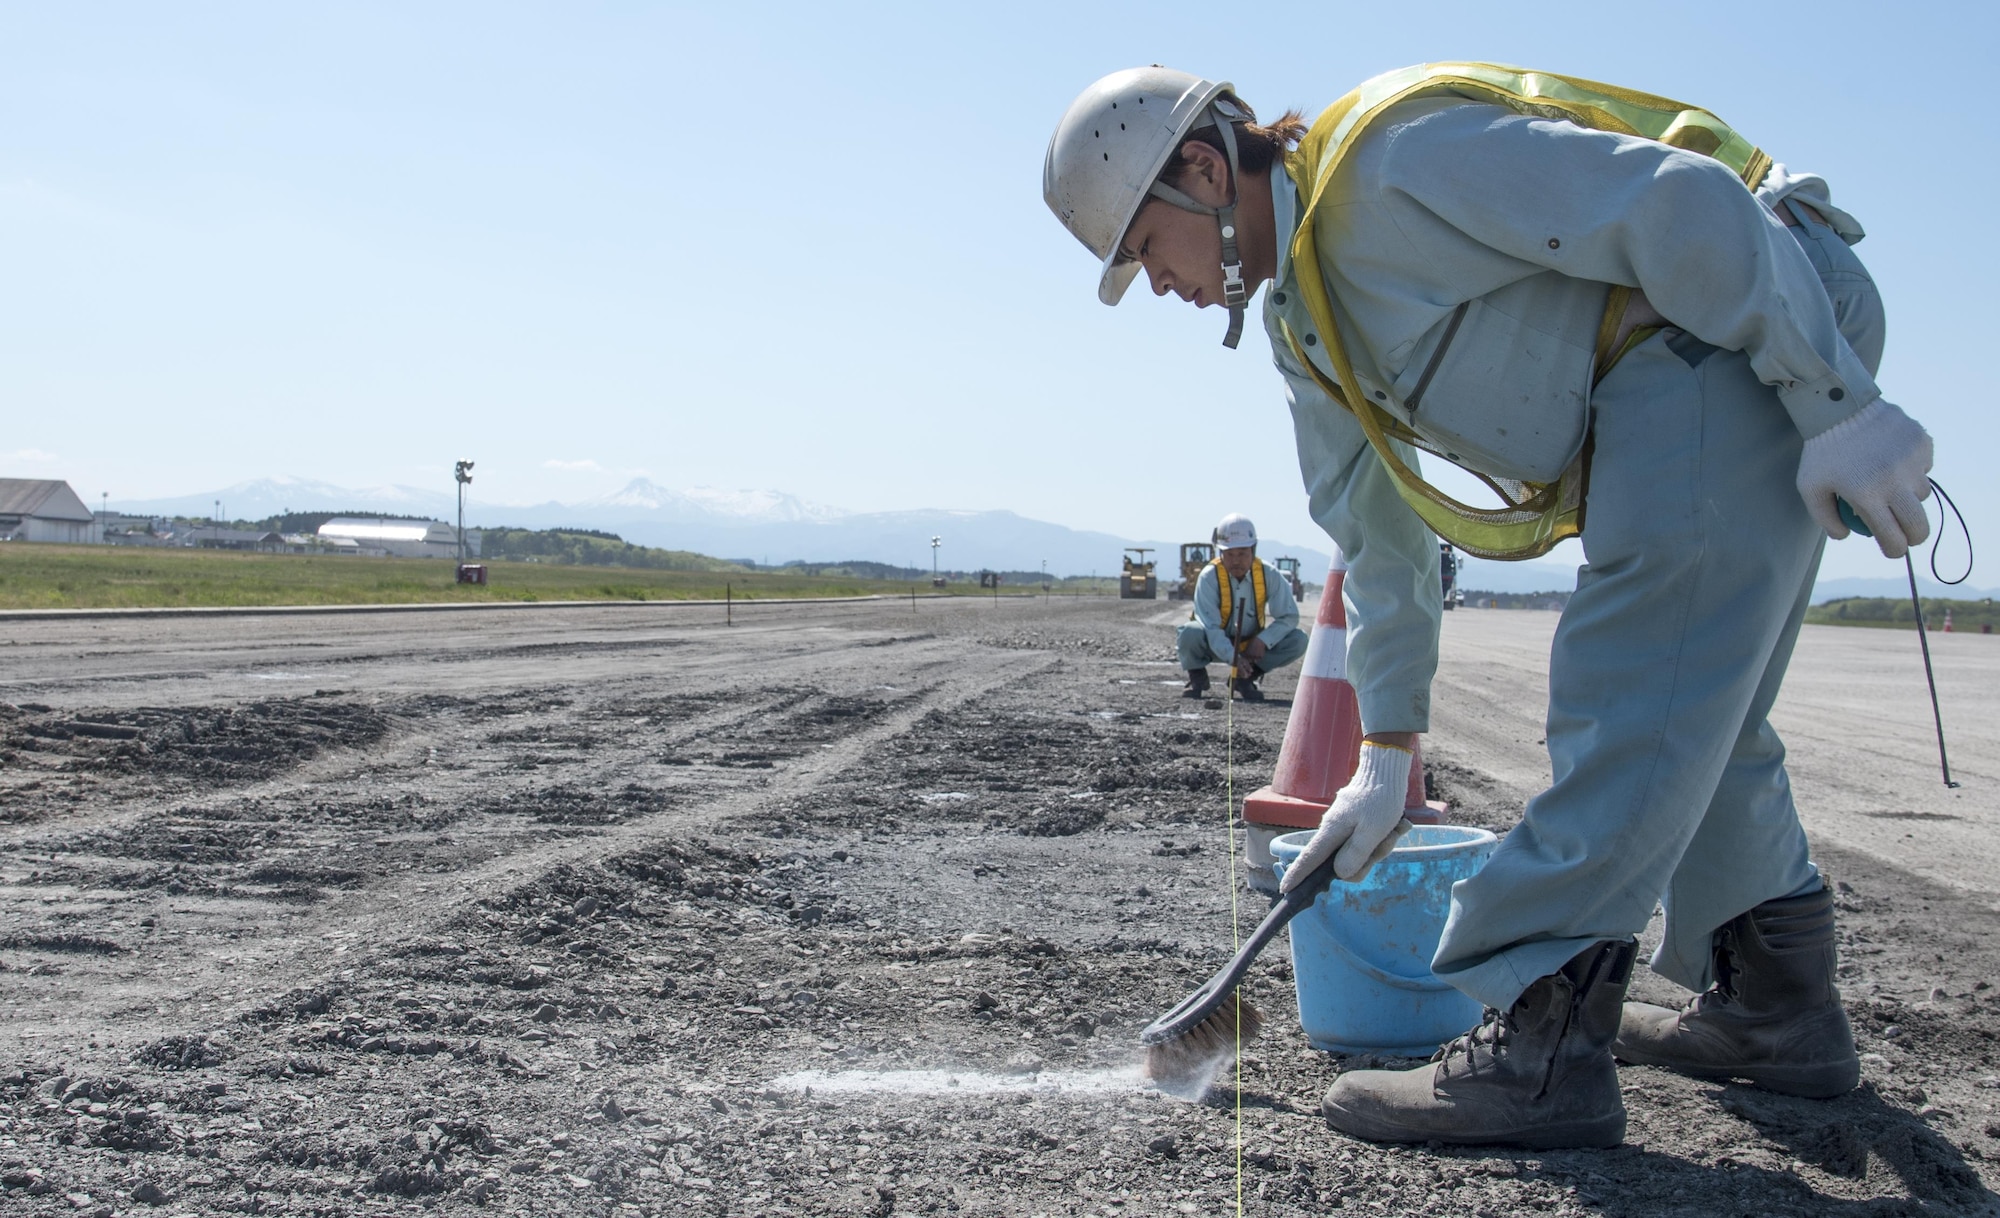 Japanese contractors conduct routine maintenance on the airfield at Misawa Air Base, Japan, May 18, 2017. The runway become fully operational June 26, more than a week ahead of schedule. The construction repaired degrading asphalt, spanning 1,463 meters, solidifying the 35th Fighter Wing to continue projecting power within the Indo-Asia-Pacific region and supporting its allies. (U.S. Air Force photo by Staff Sgt. Melanie Hutto)